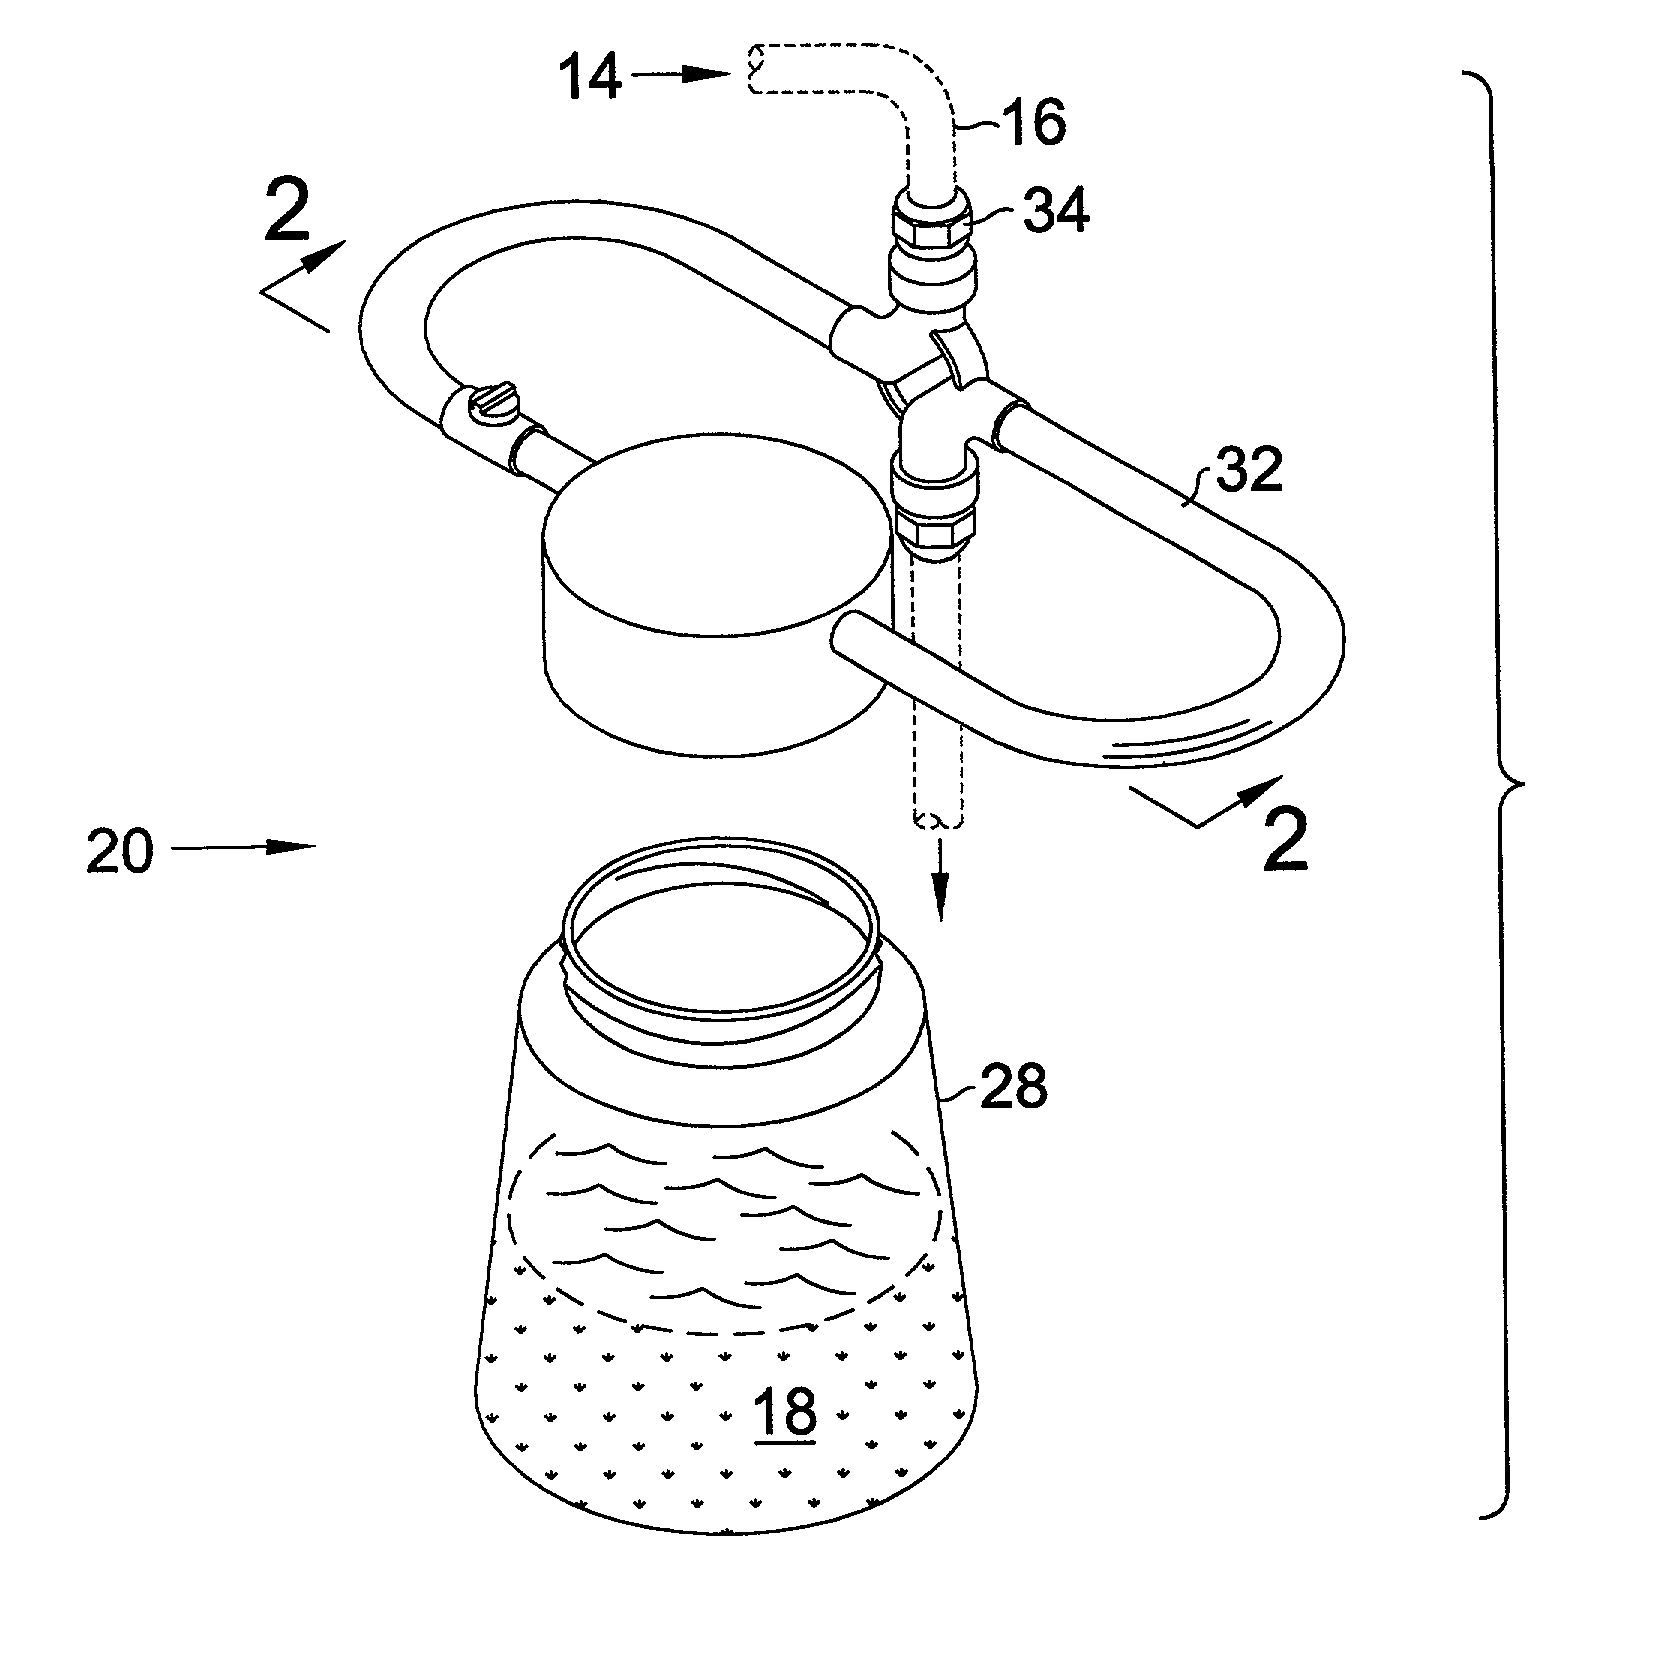 Method of maintaining a yard having a sprinkling system